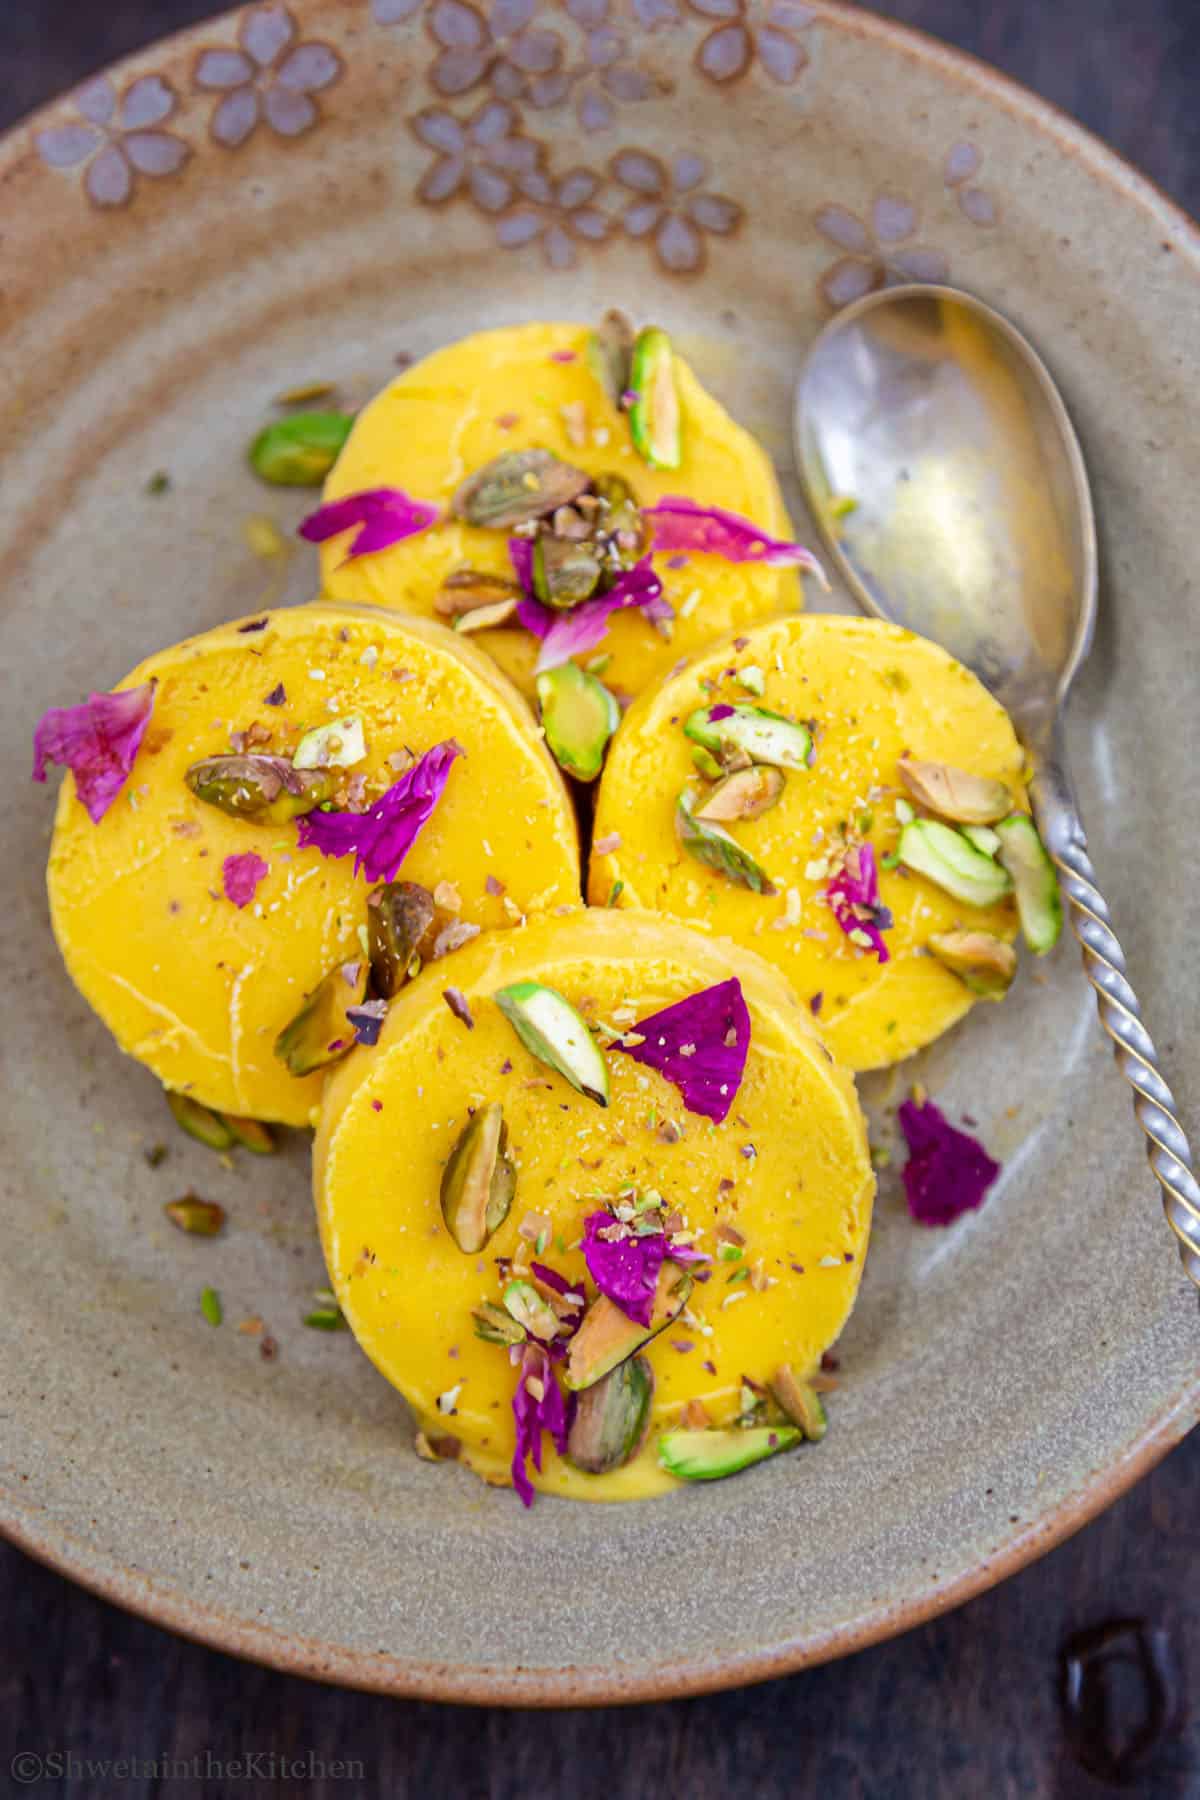 Sliced kulfi pieces of plate with spoon on side